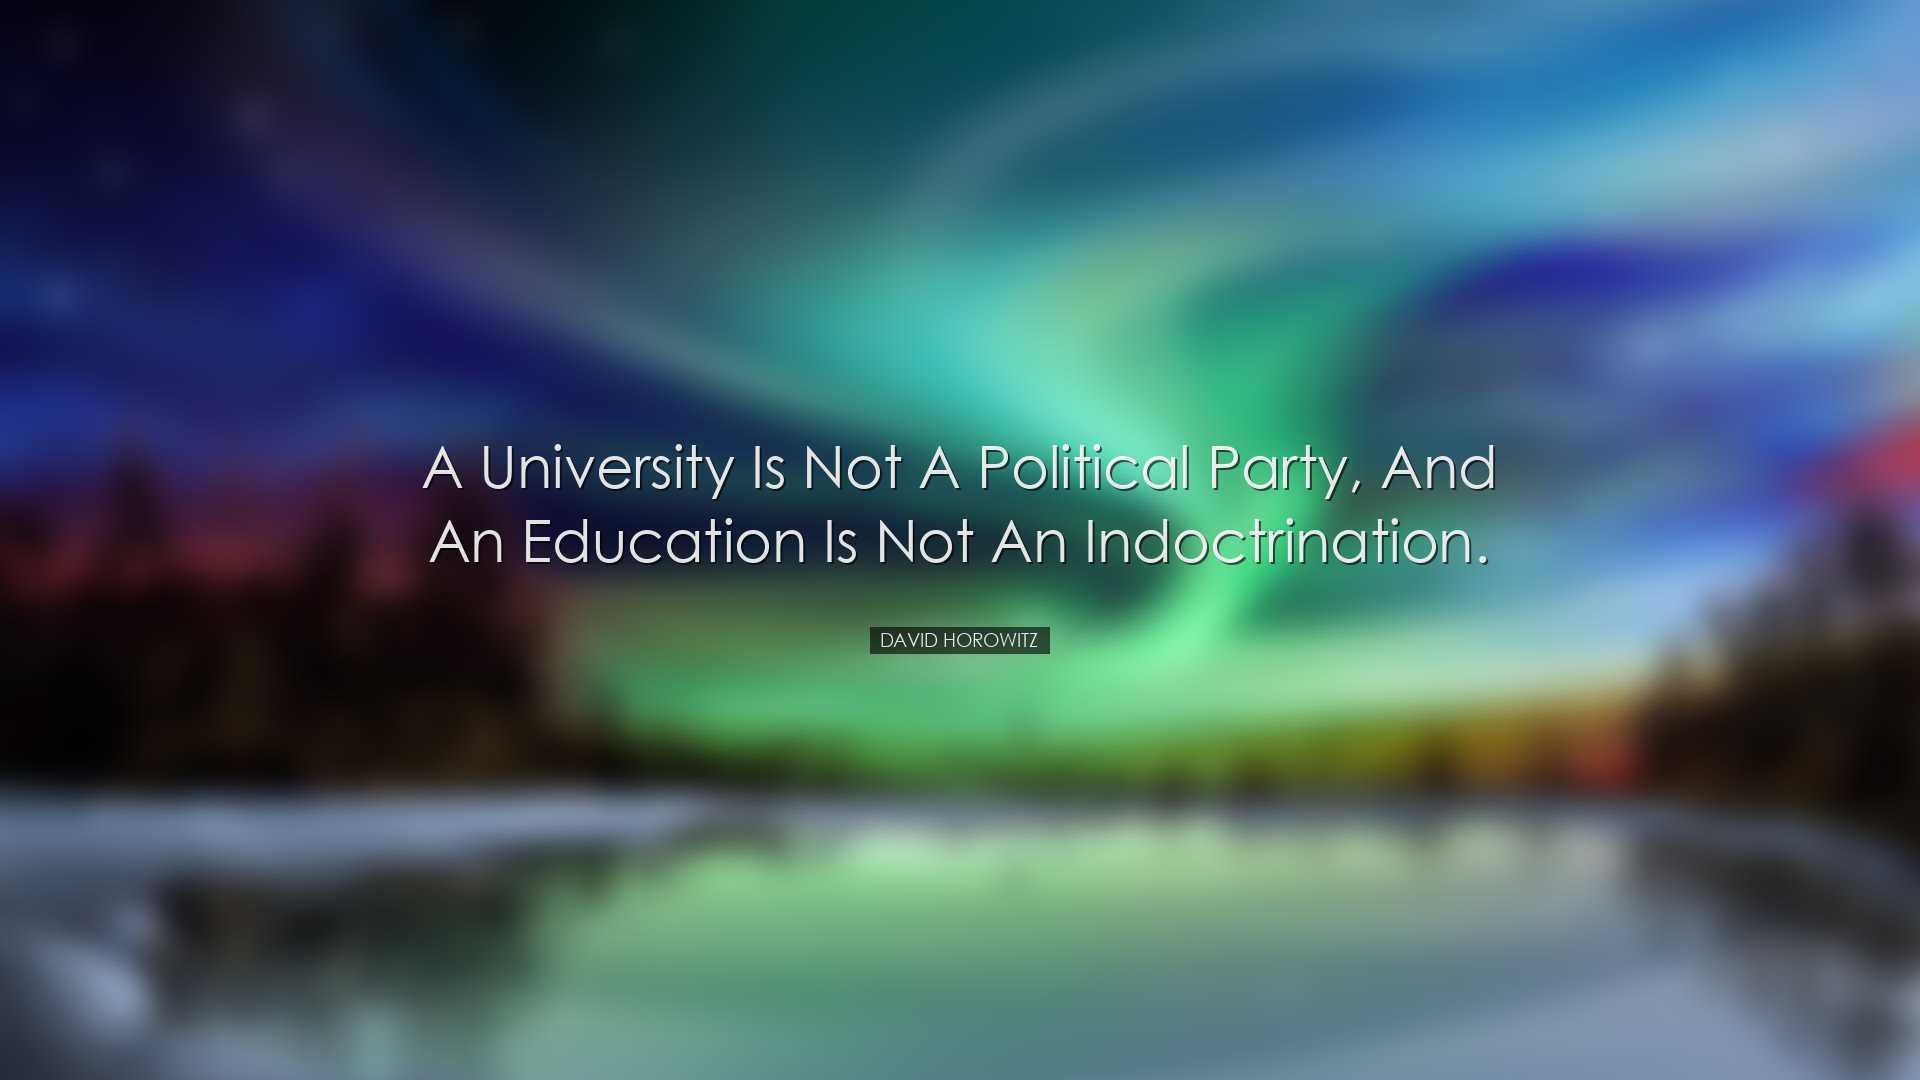 A university is not a political party, and an education is not an